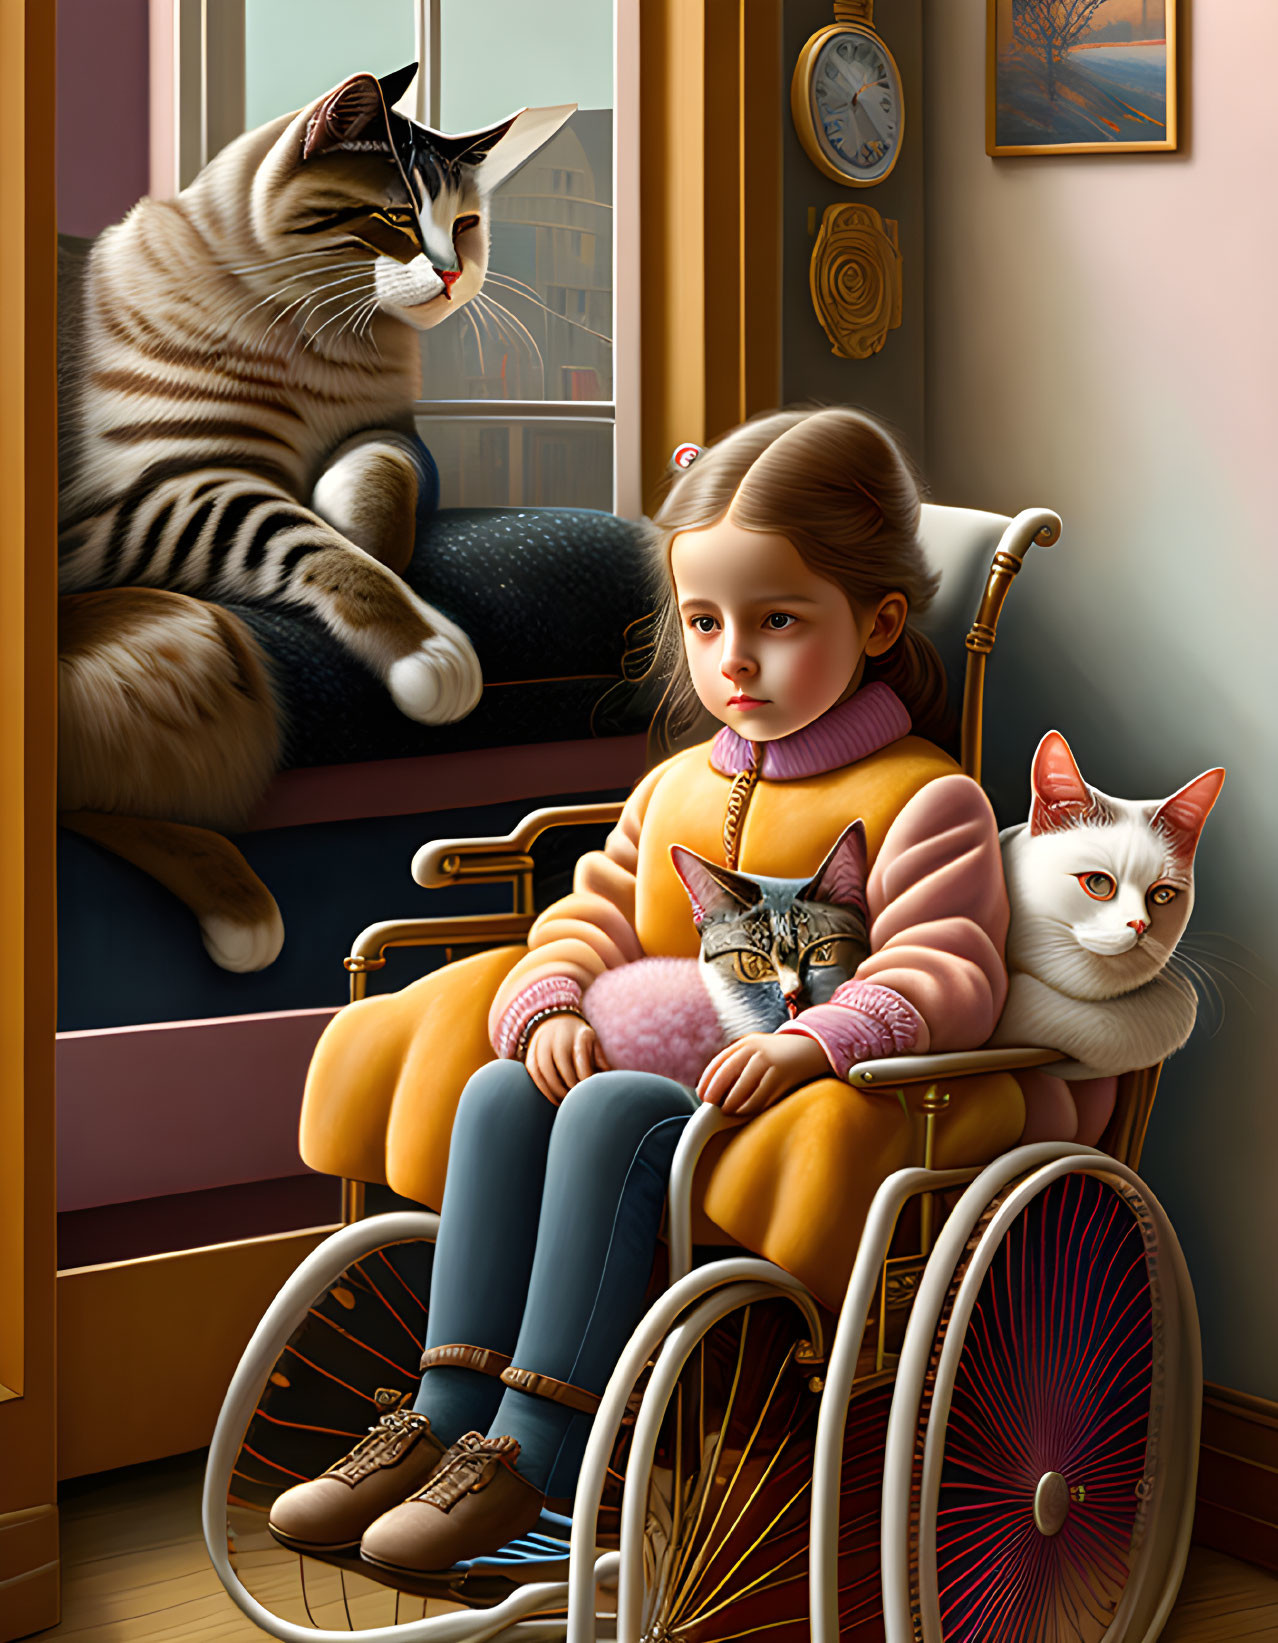 Girl in wheelchair indoors with two cats and urban backdrop